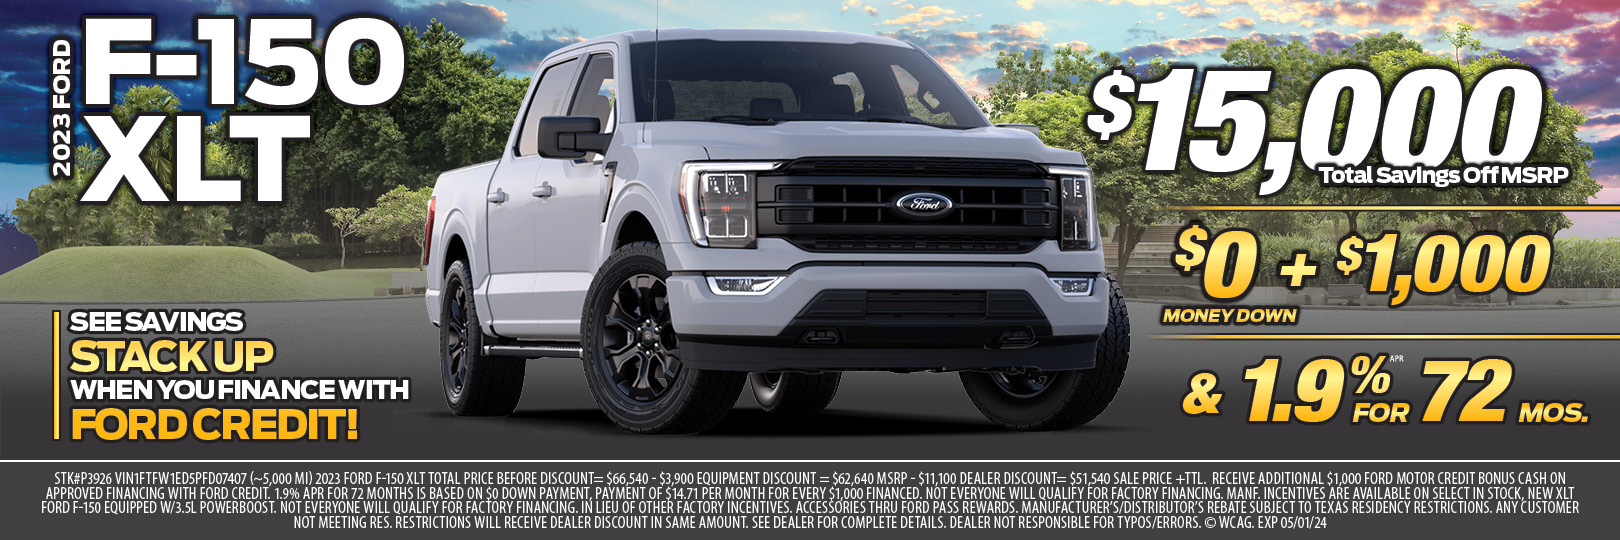 Ford F-150 Special Deal Houston | The Woodlands | Spring